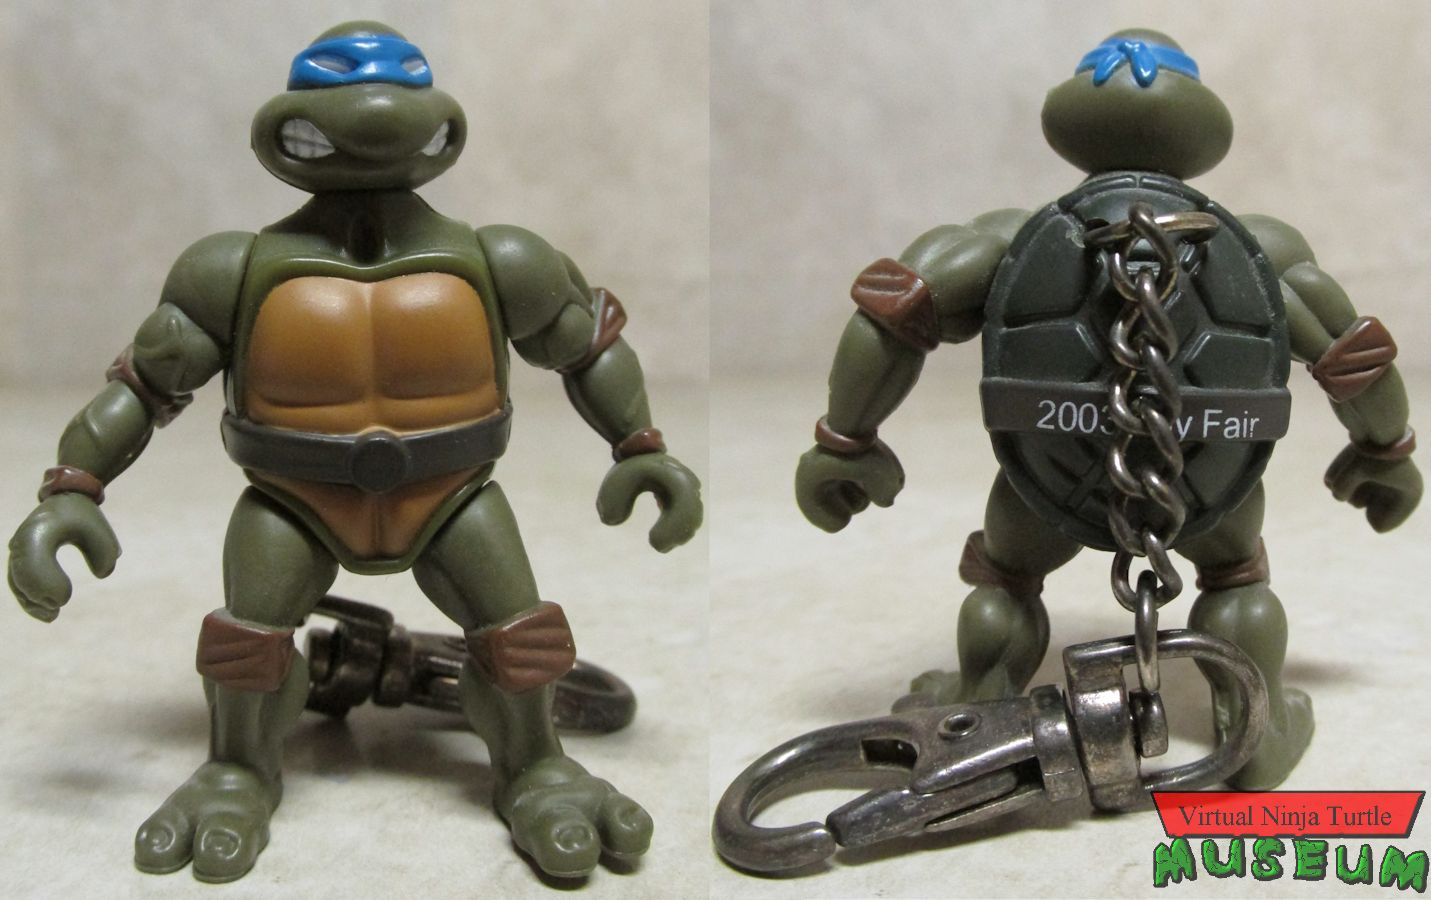 Toy Fair Promotional Leonardo Keychain front and back